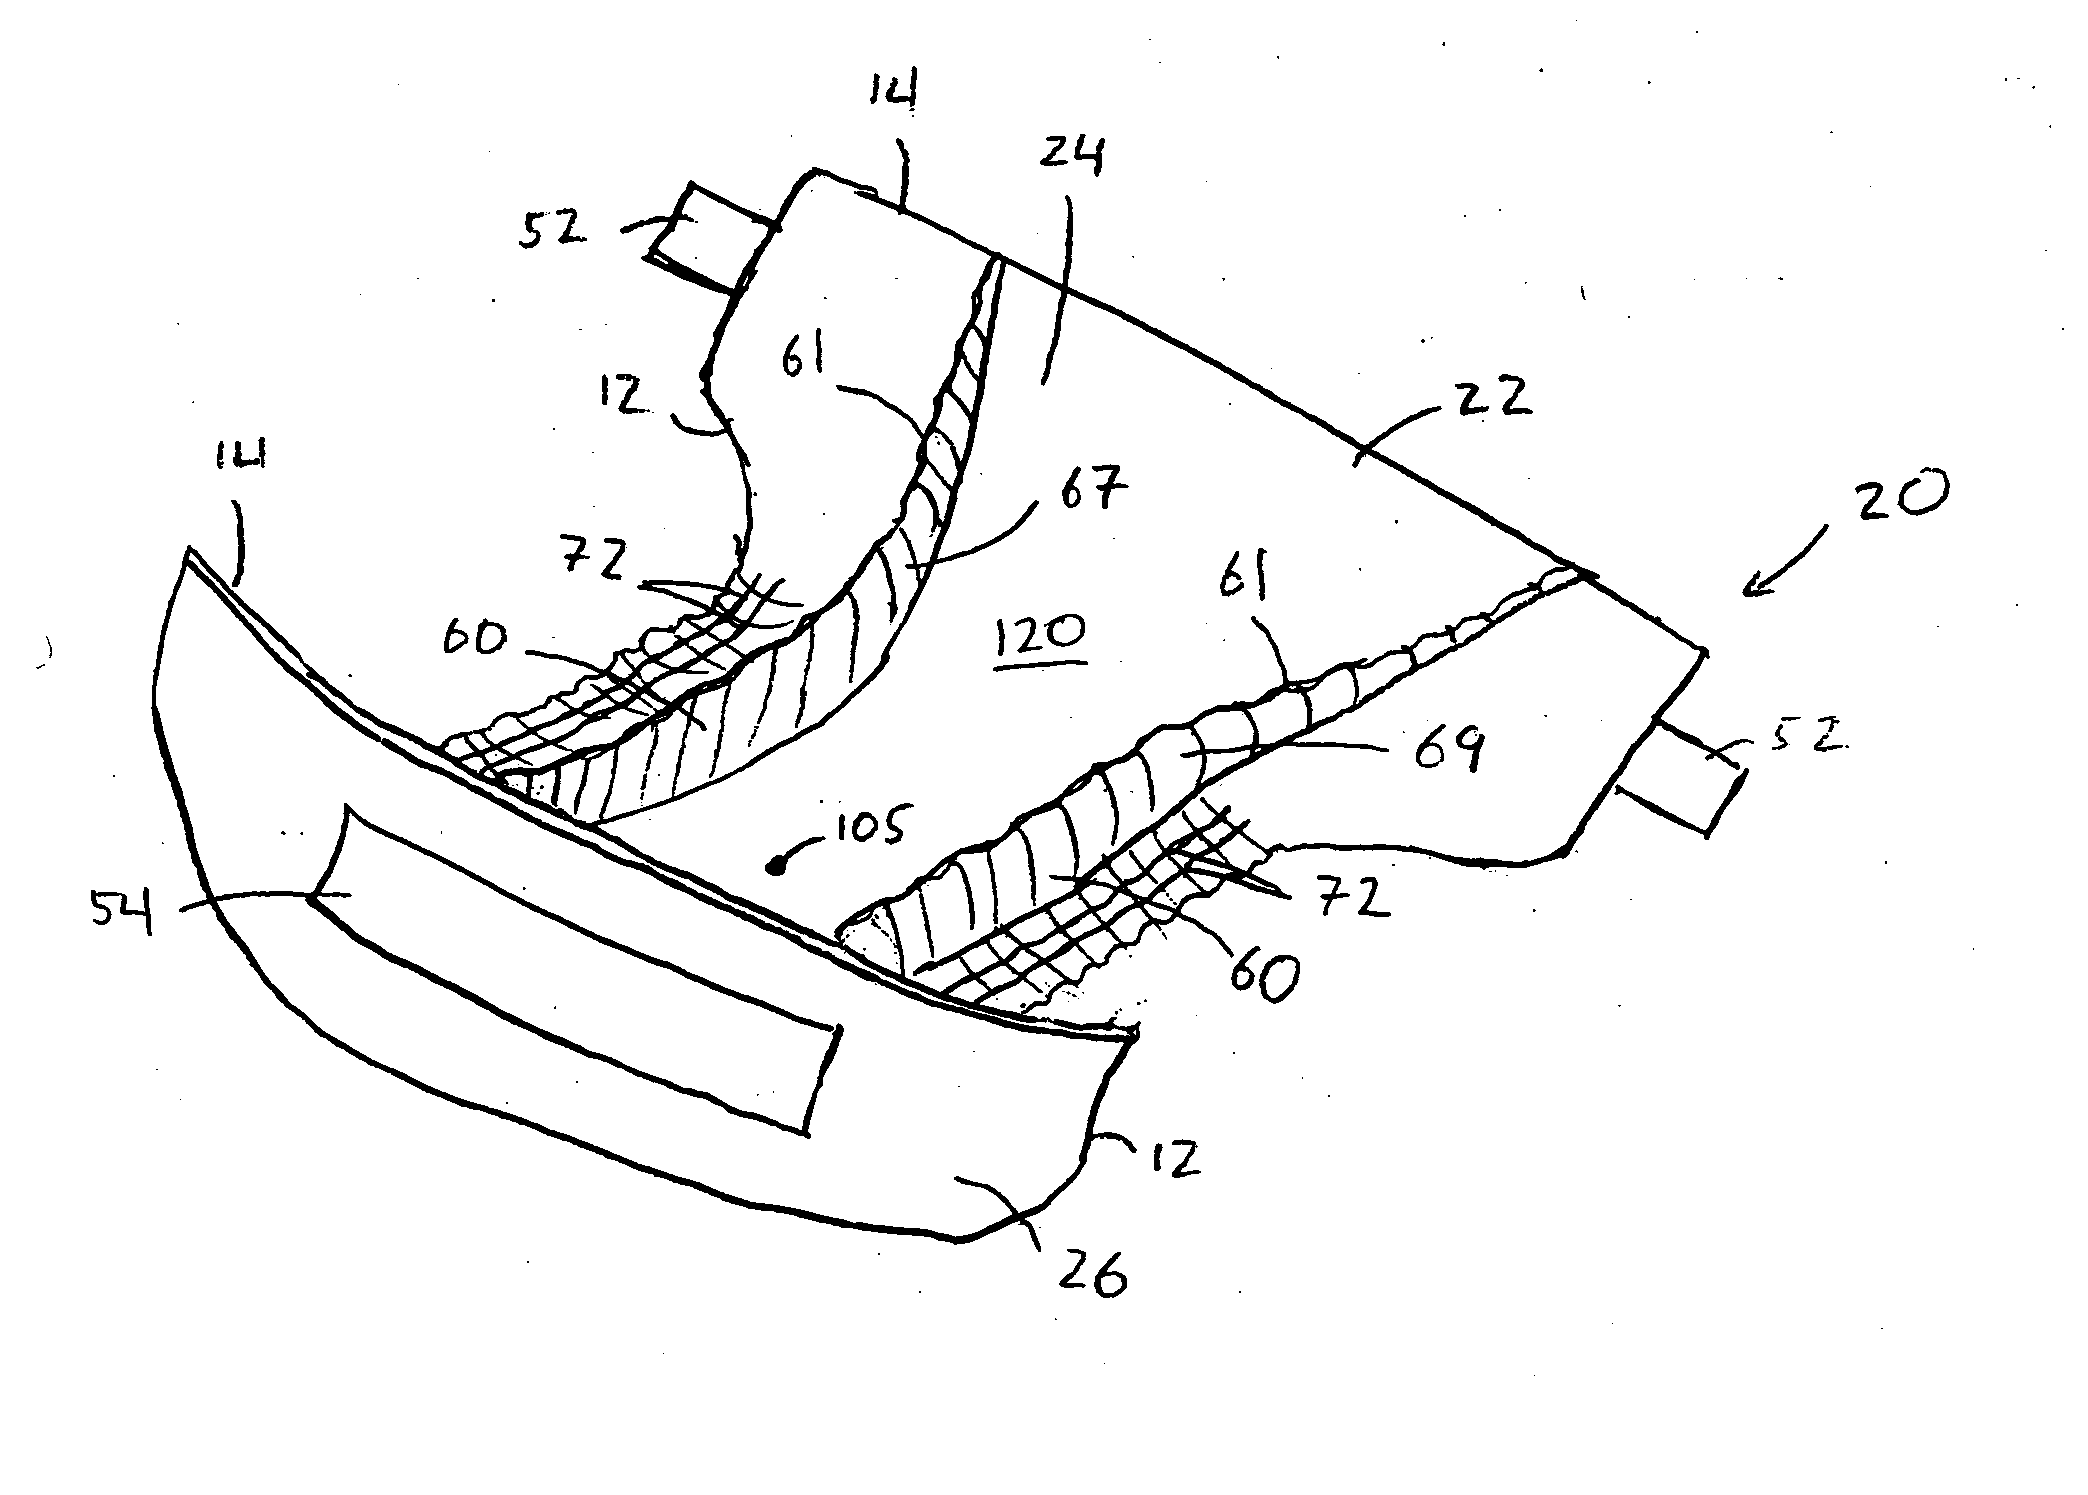 Absorbent article having a multi-dimensionally contoured barrier cuff